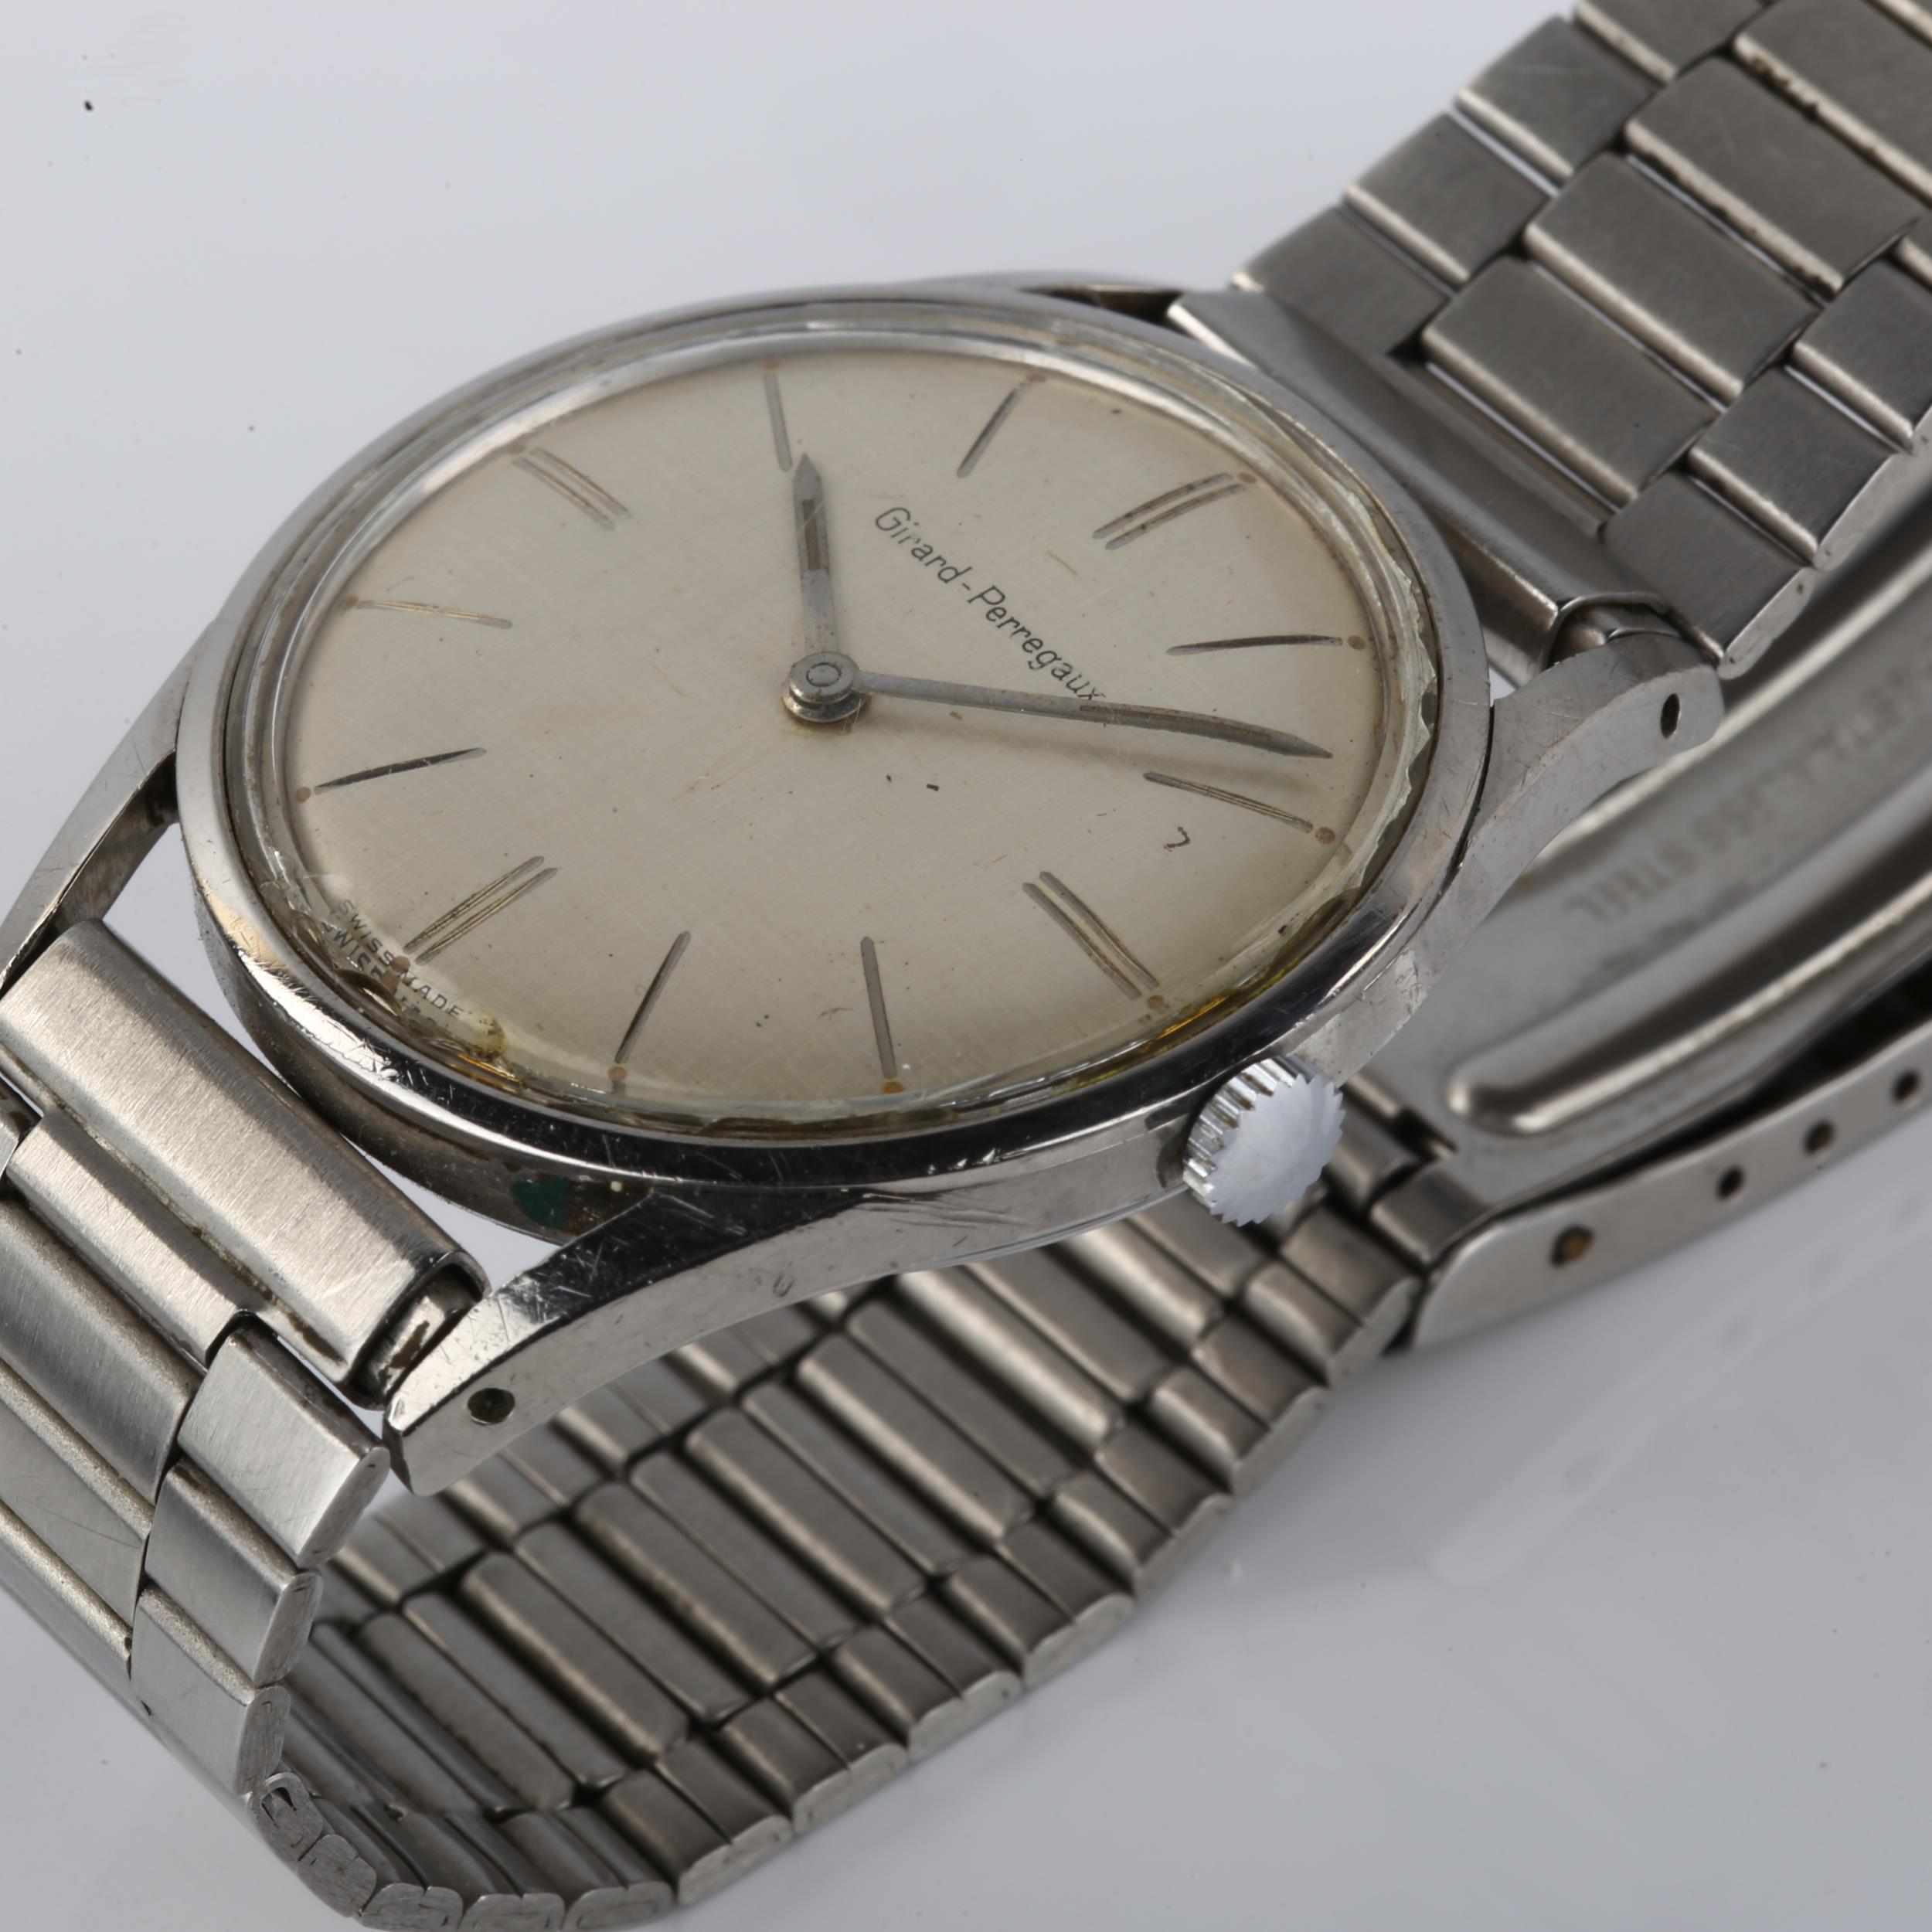 GIRARD-PERREGAUX - a Vintage stainless steel mechanical wristwatch, circa 1960s, brushed silvered - Image 4 of 4